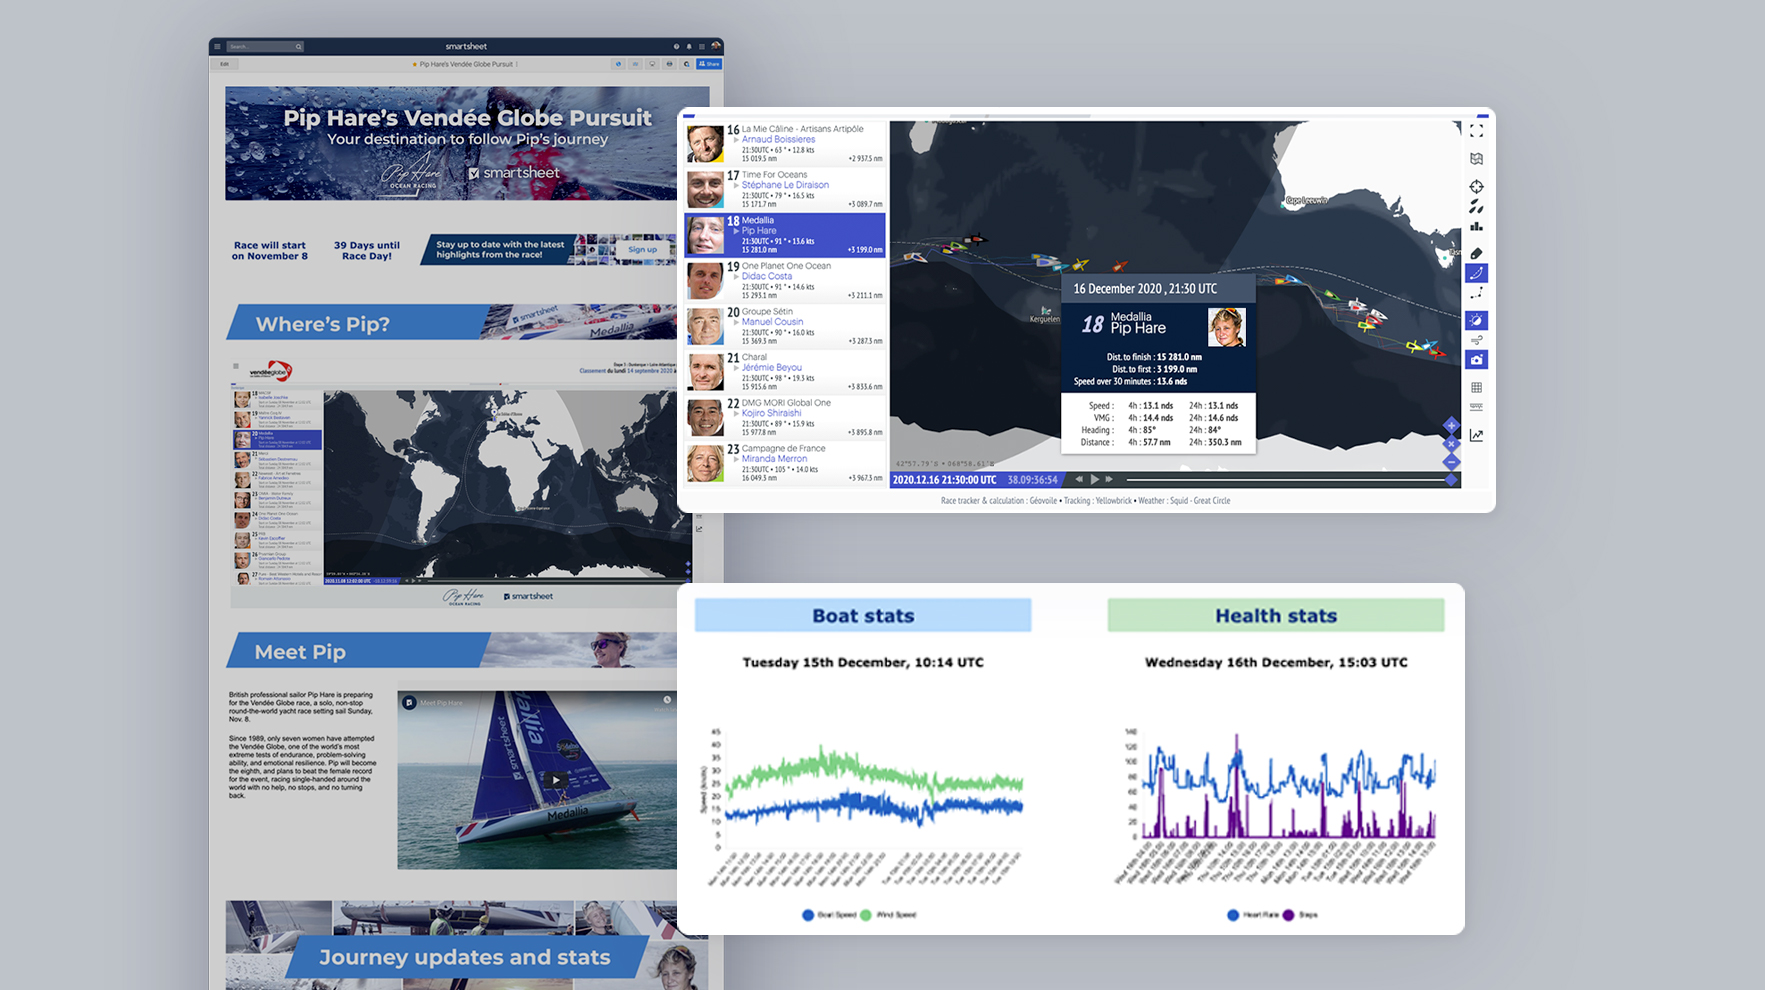 Screenshots of the Pip Hare Vendée Globe dashboard, race map, and boat and health stats